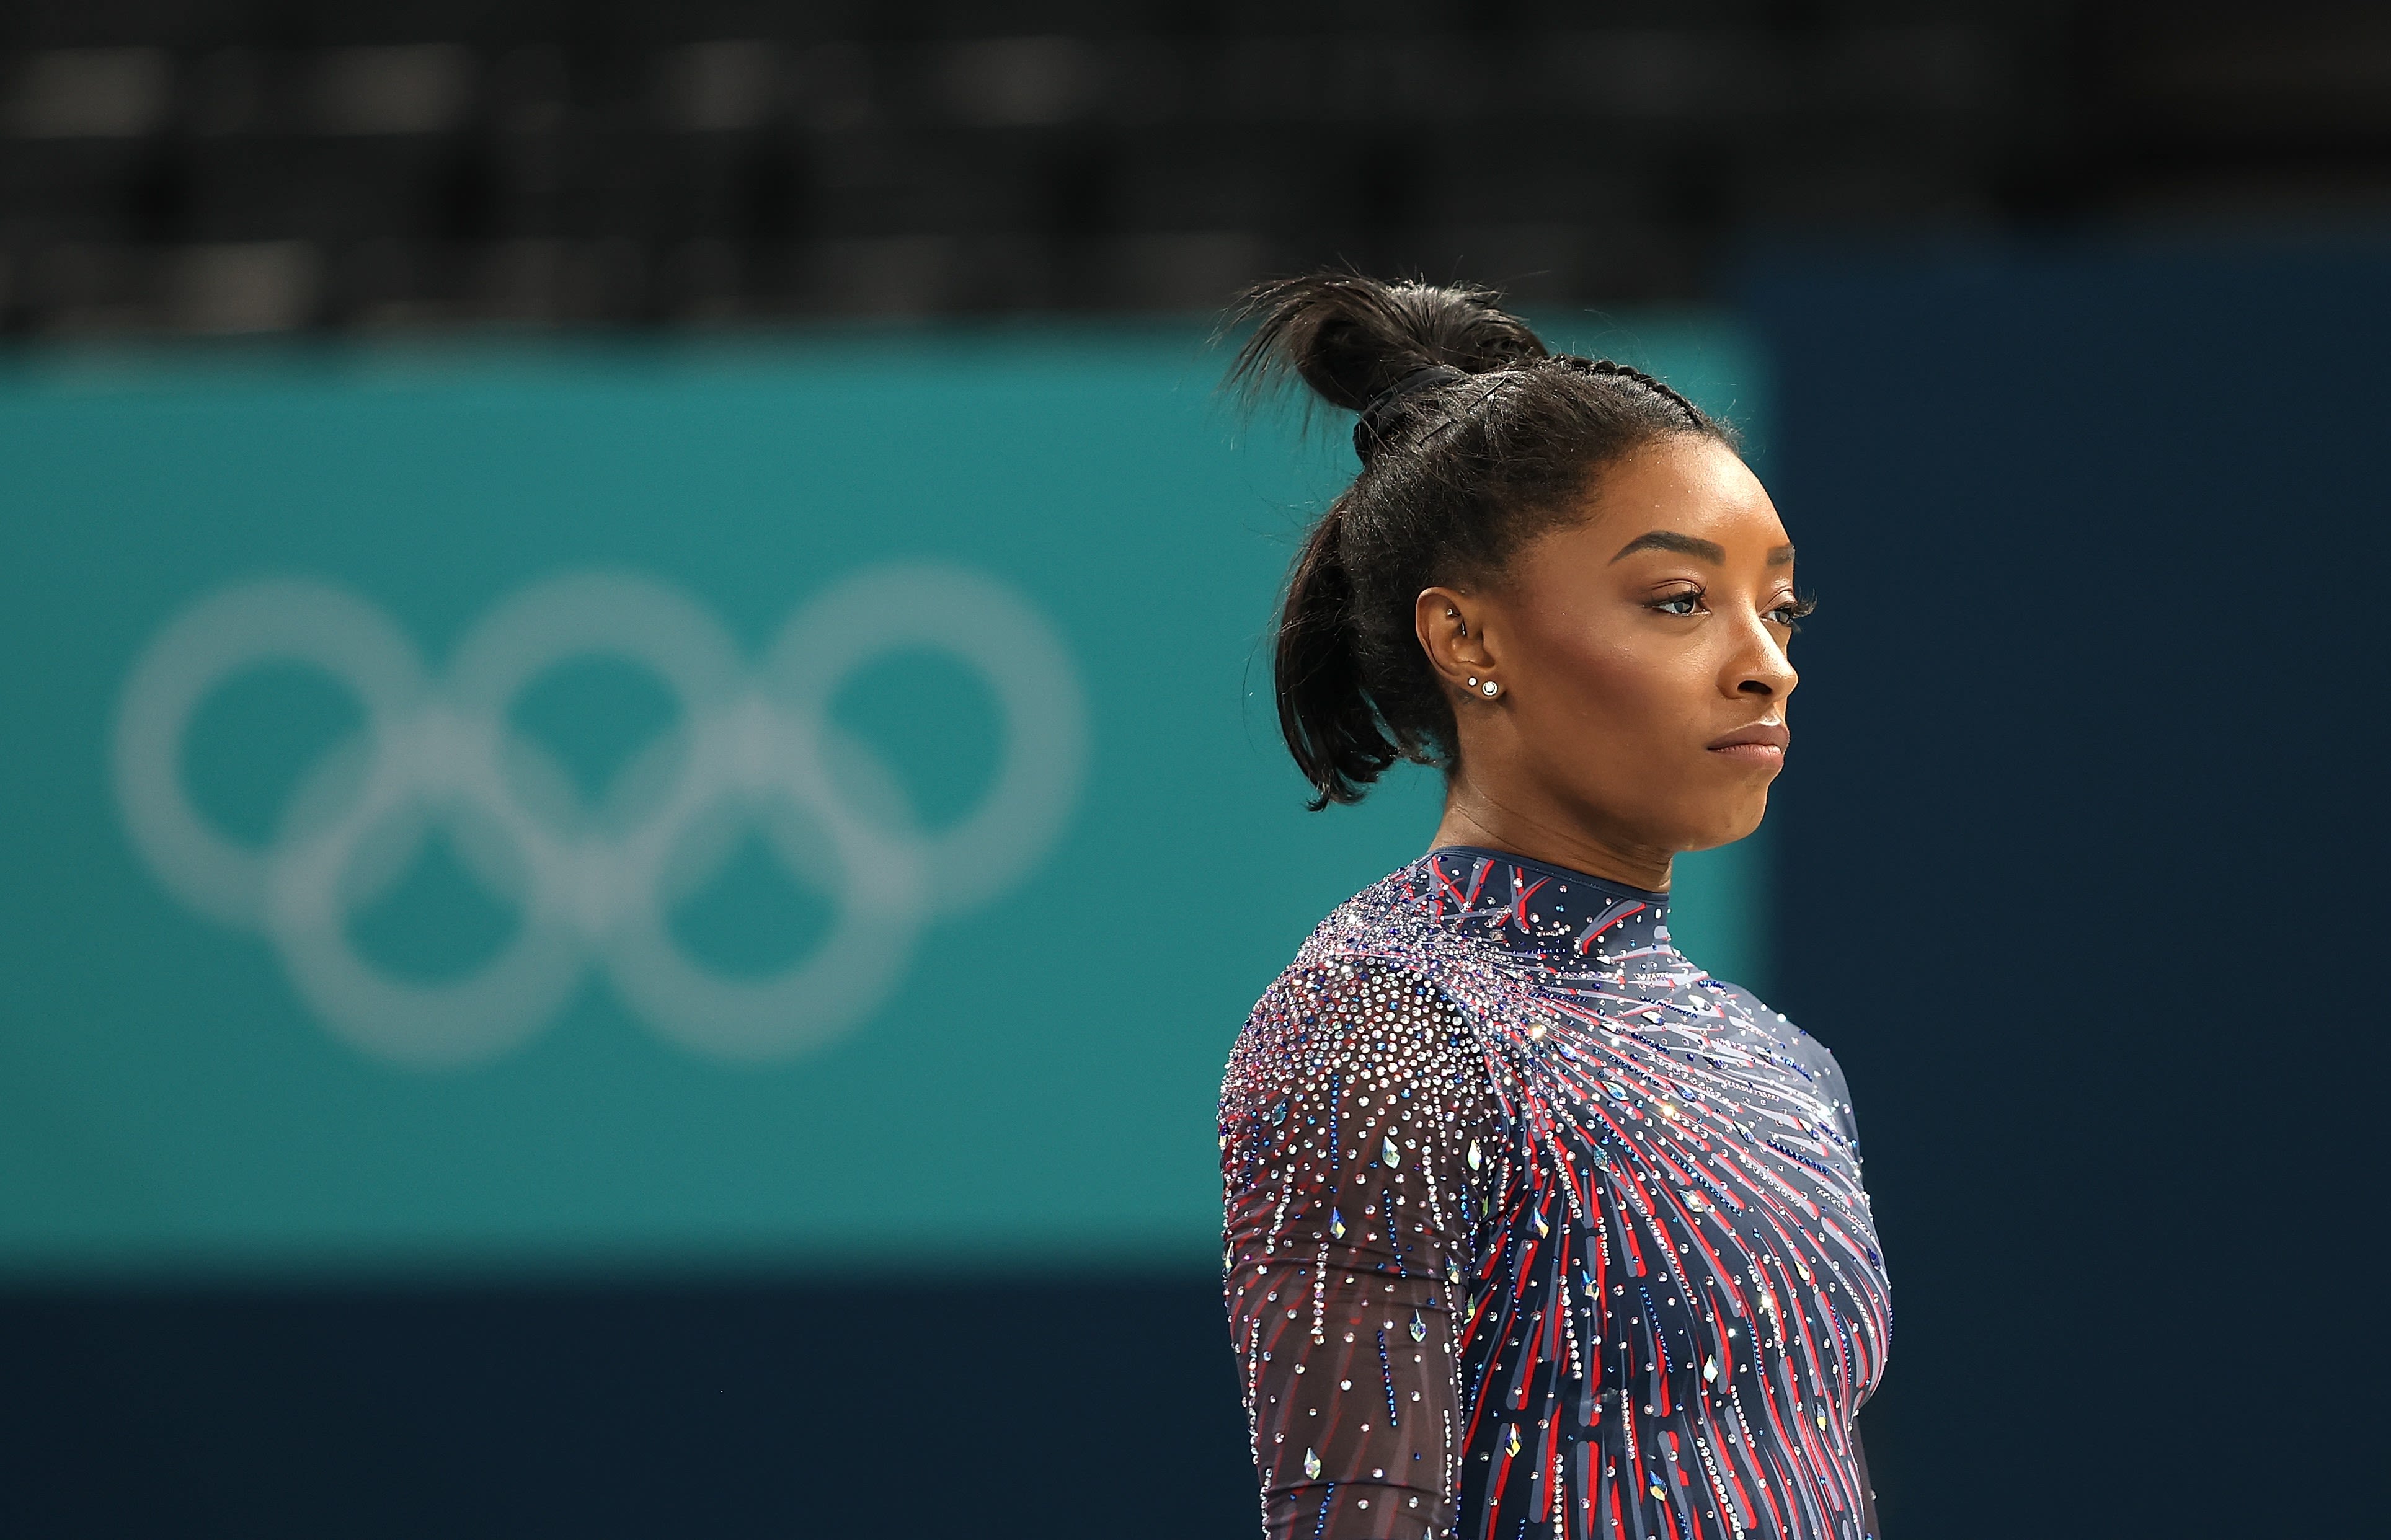 2024 Olympics schedule for July 28: LeBron James and Team USA, Simone Biles highlight Sunday's action in Paris